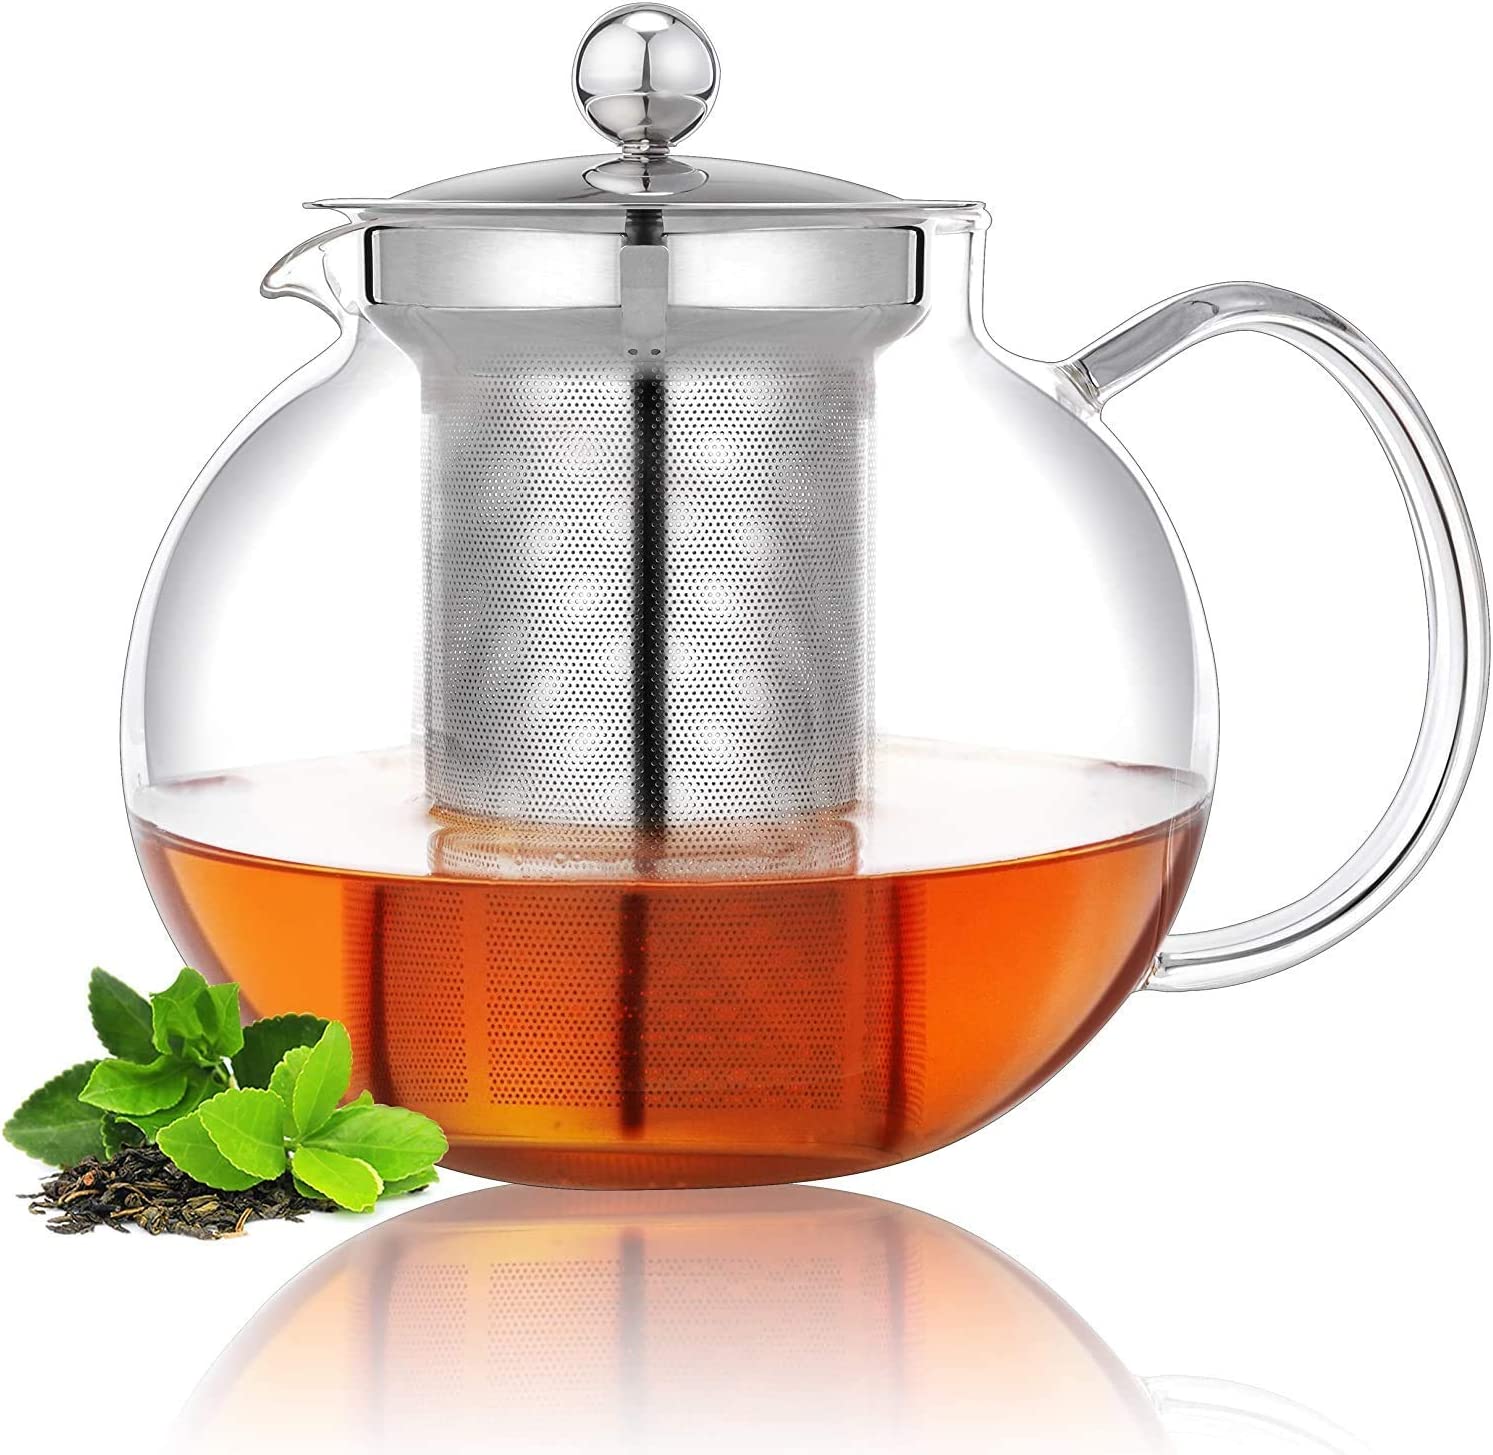 SUREWIN Glass teapot with strainer, removable stainless steel infuser (33 oz/1000 ml), perfect for loose leaf tea, tea bags, herbal tea, great gift for festival, birthday hold 3-4 cups